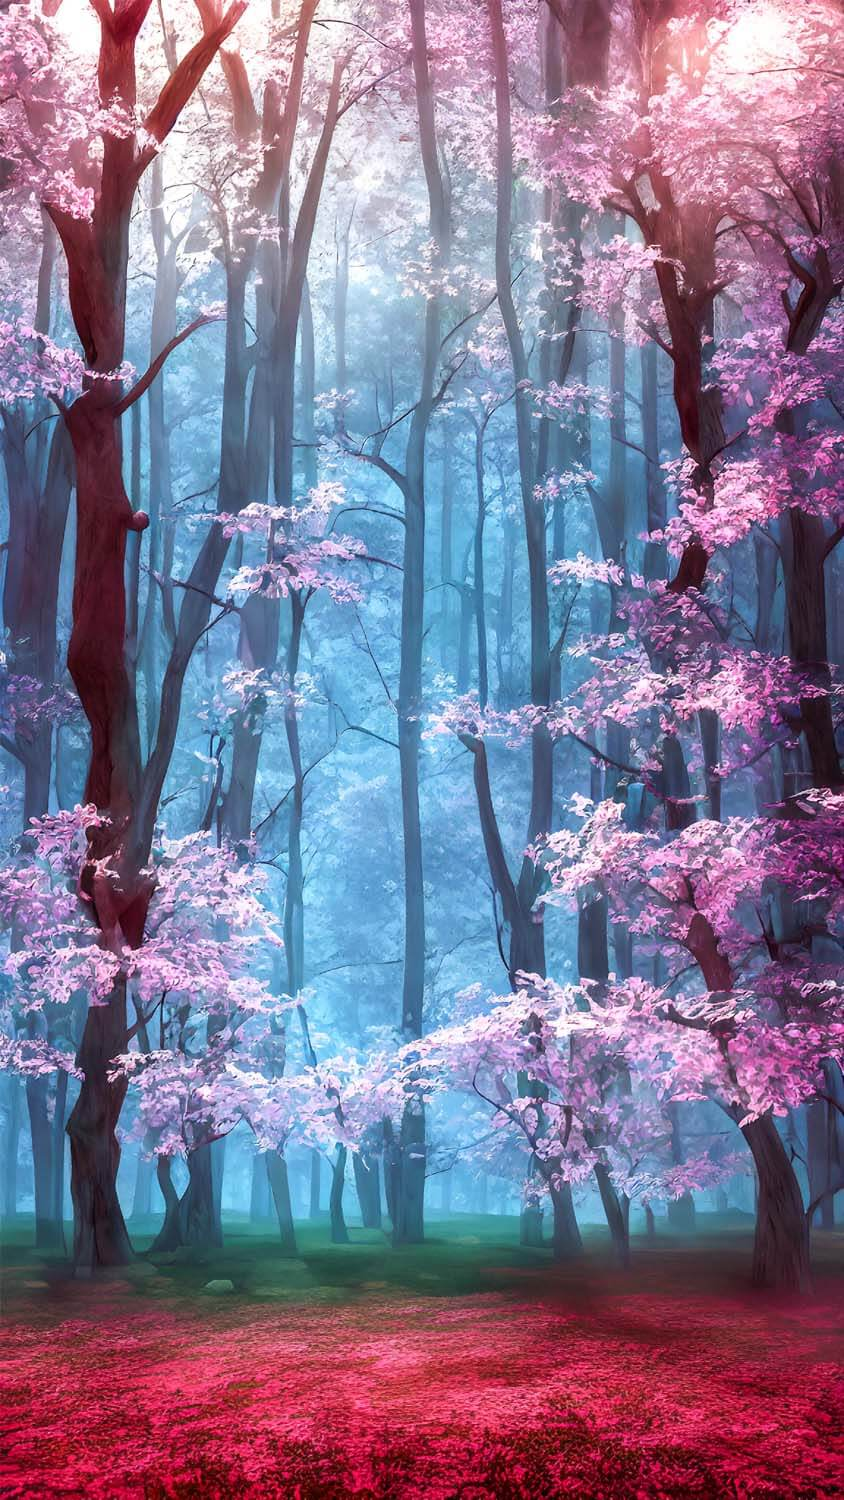 Magical Forest IPhone Wallpaper HD  IPhone Wallpapers